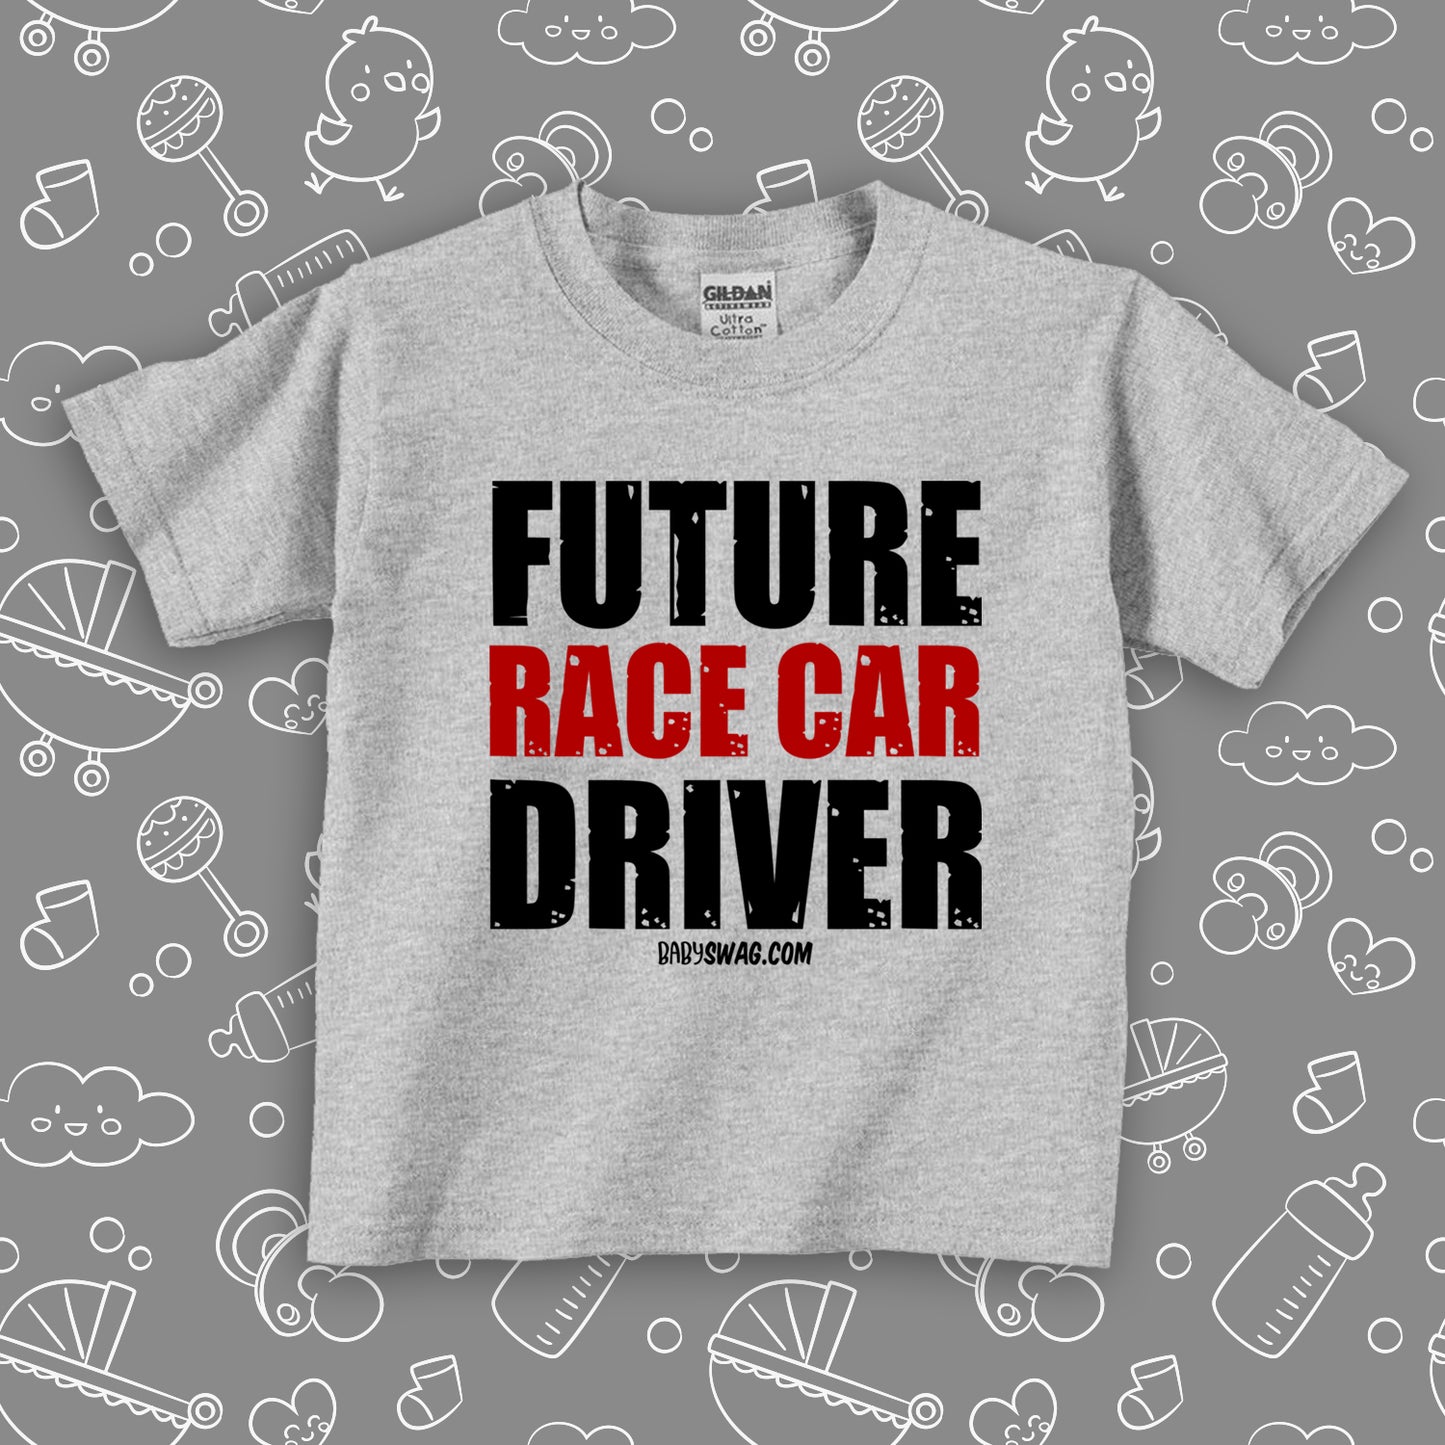 Grey cool toddler shirt with the print "Future Race Car Driver".